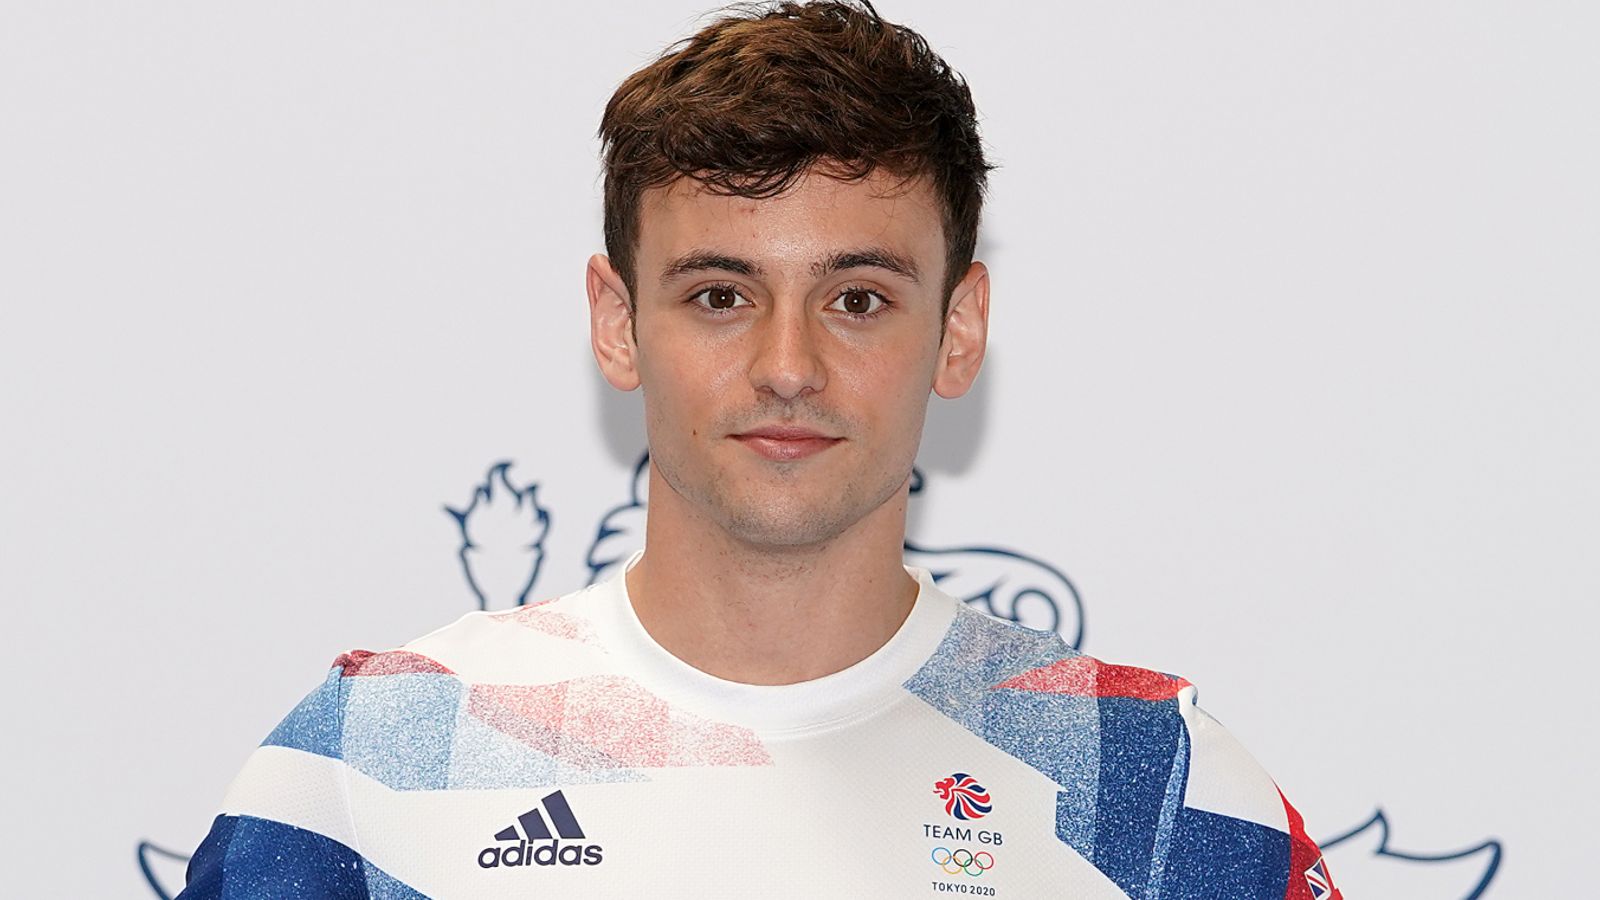 Tom Daley: Team GB diver discusses Tokyo Olympics ambitions and how fatherhood has changed him